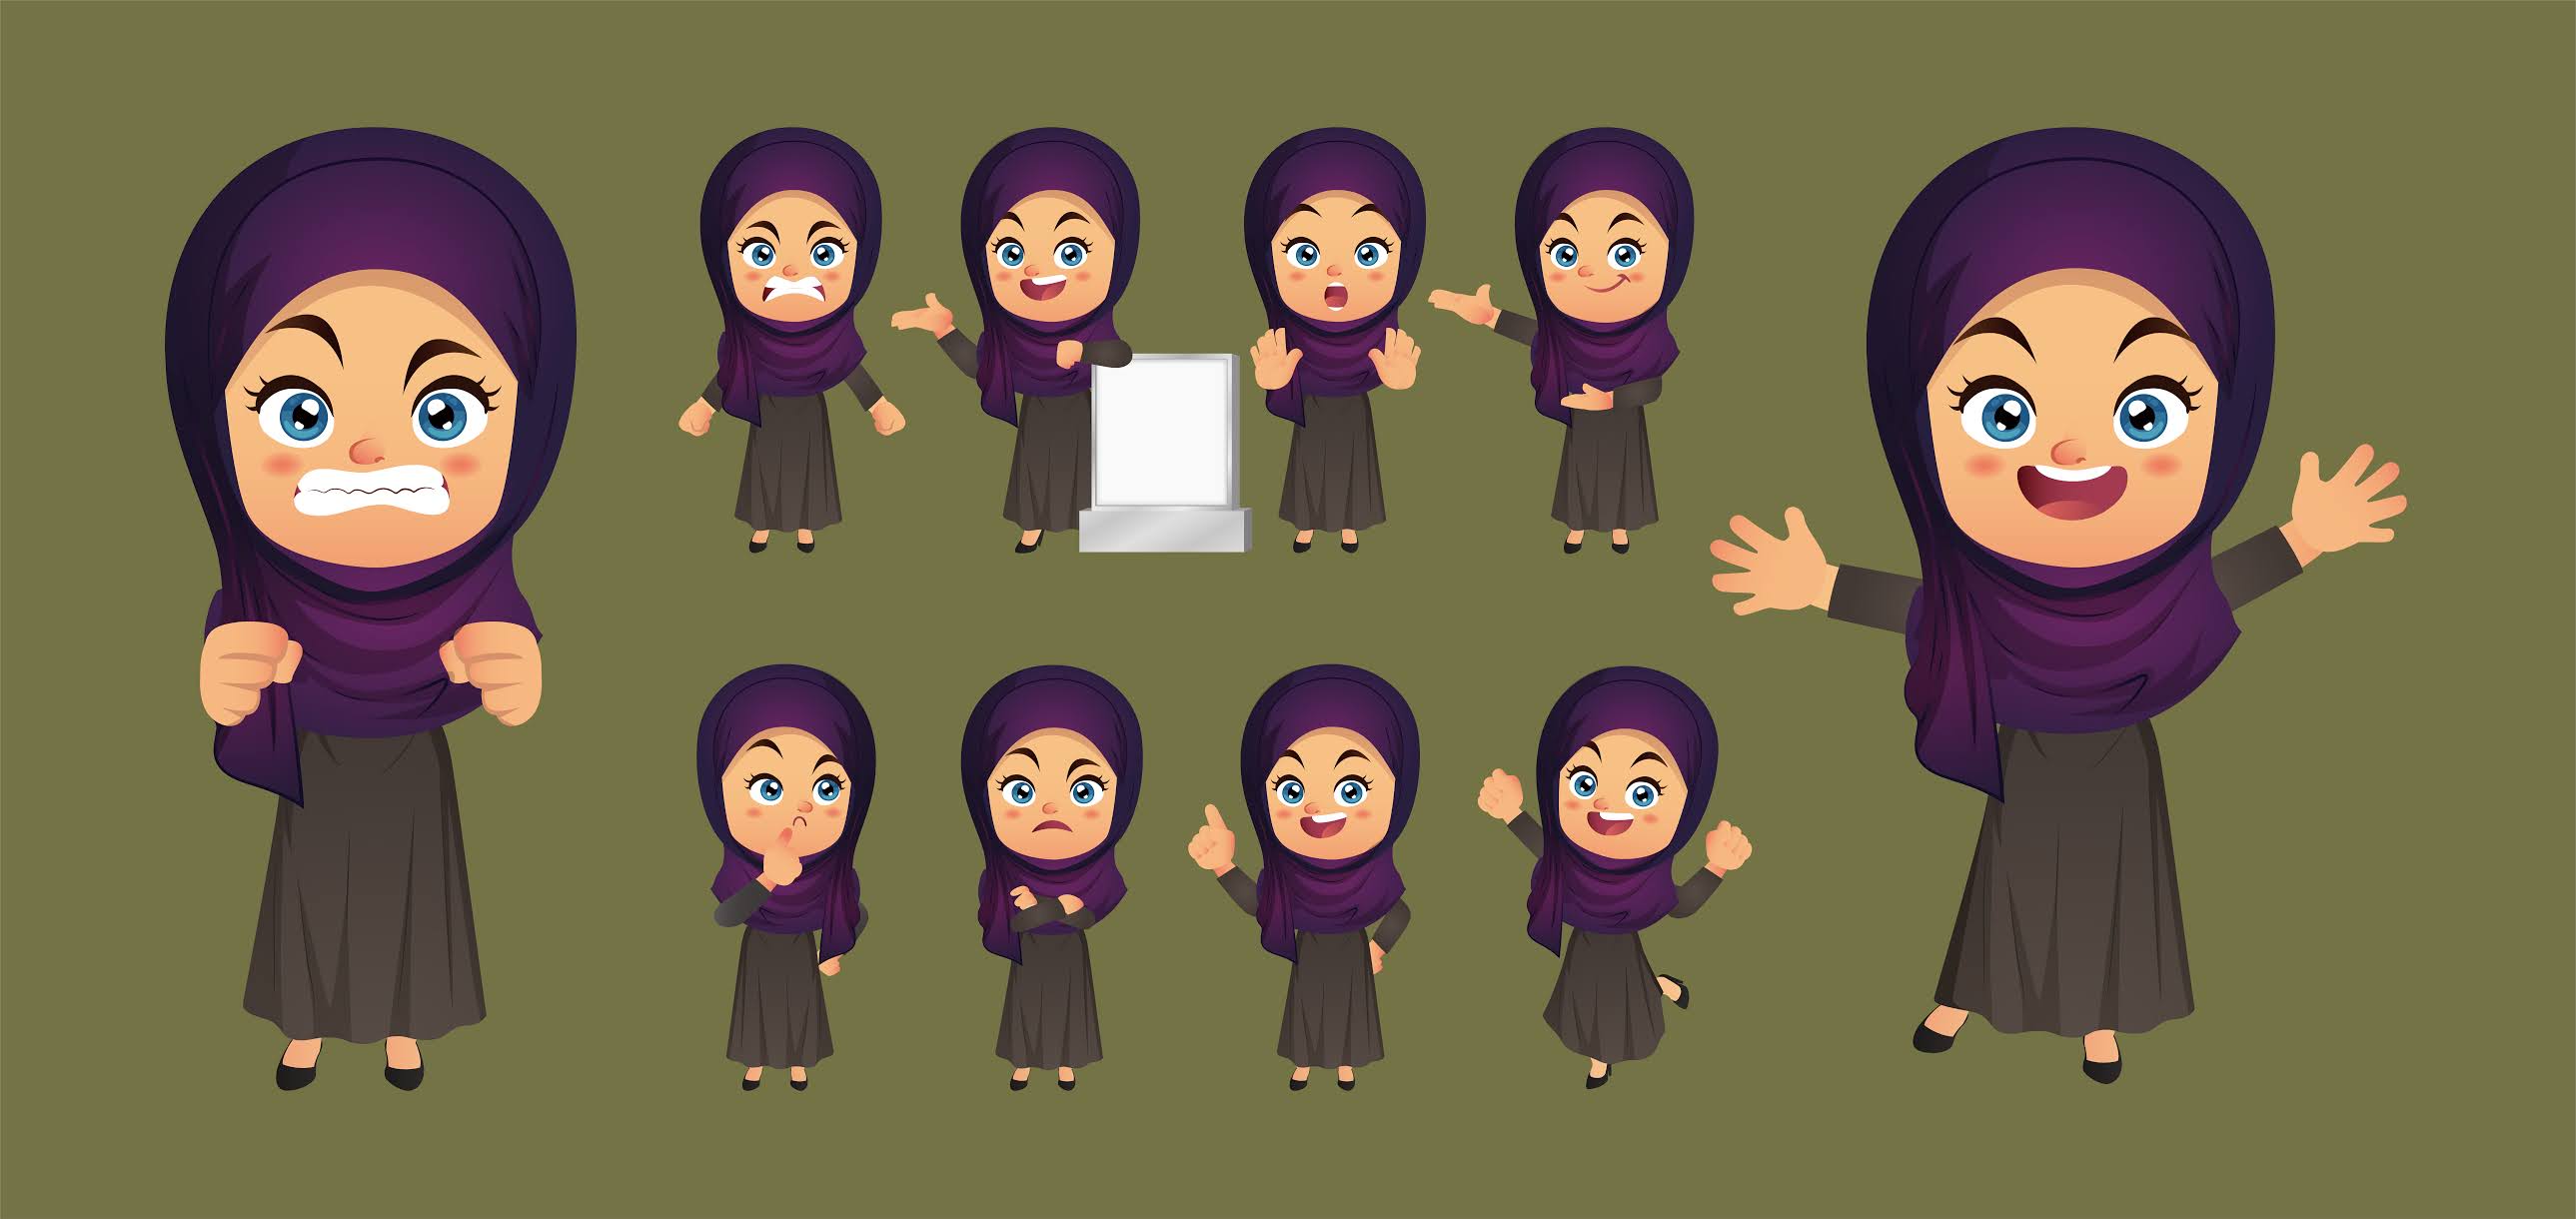 A collection of beautiful veiled Muslim children designs in Photoshop vector format